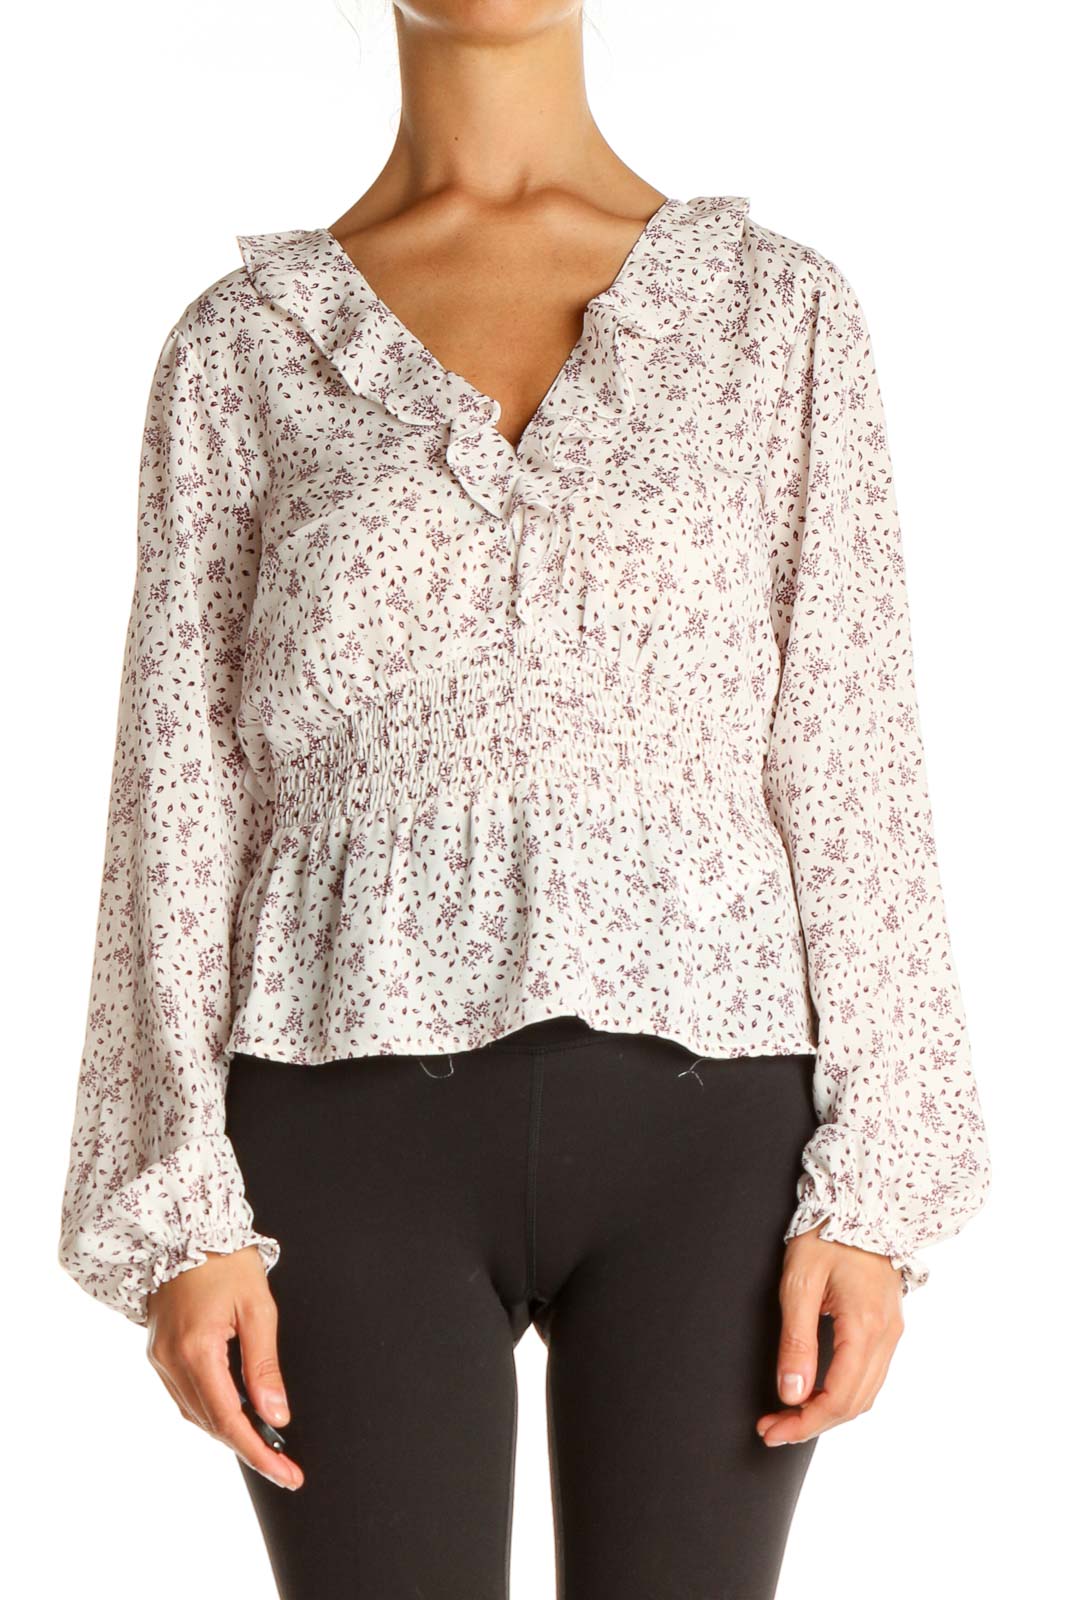 White Floral Print All Day Wear Blouse Front